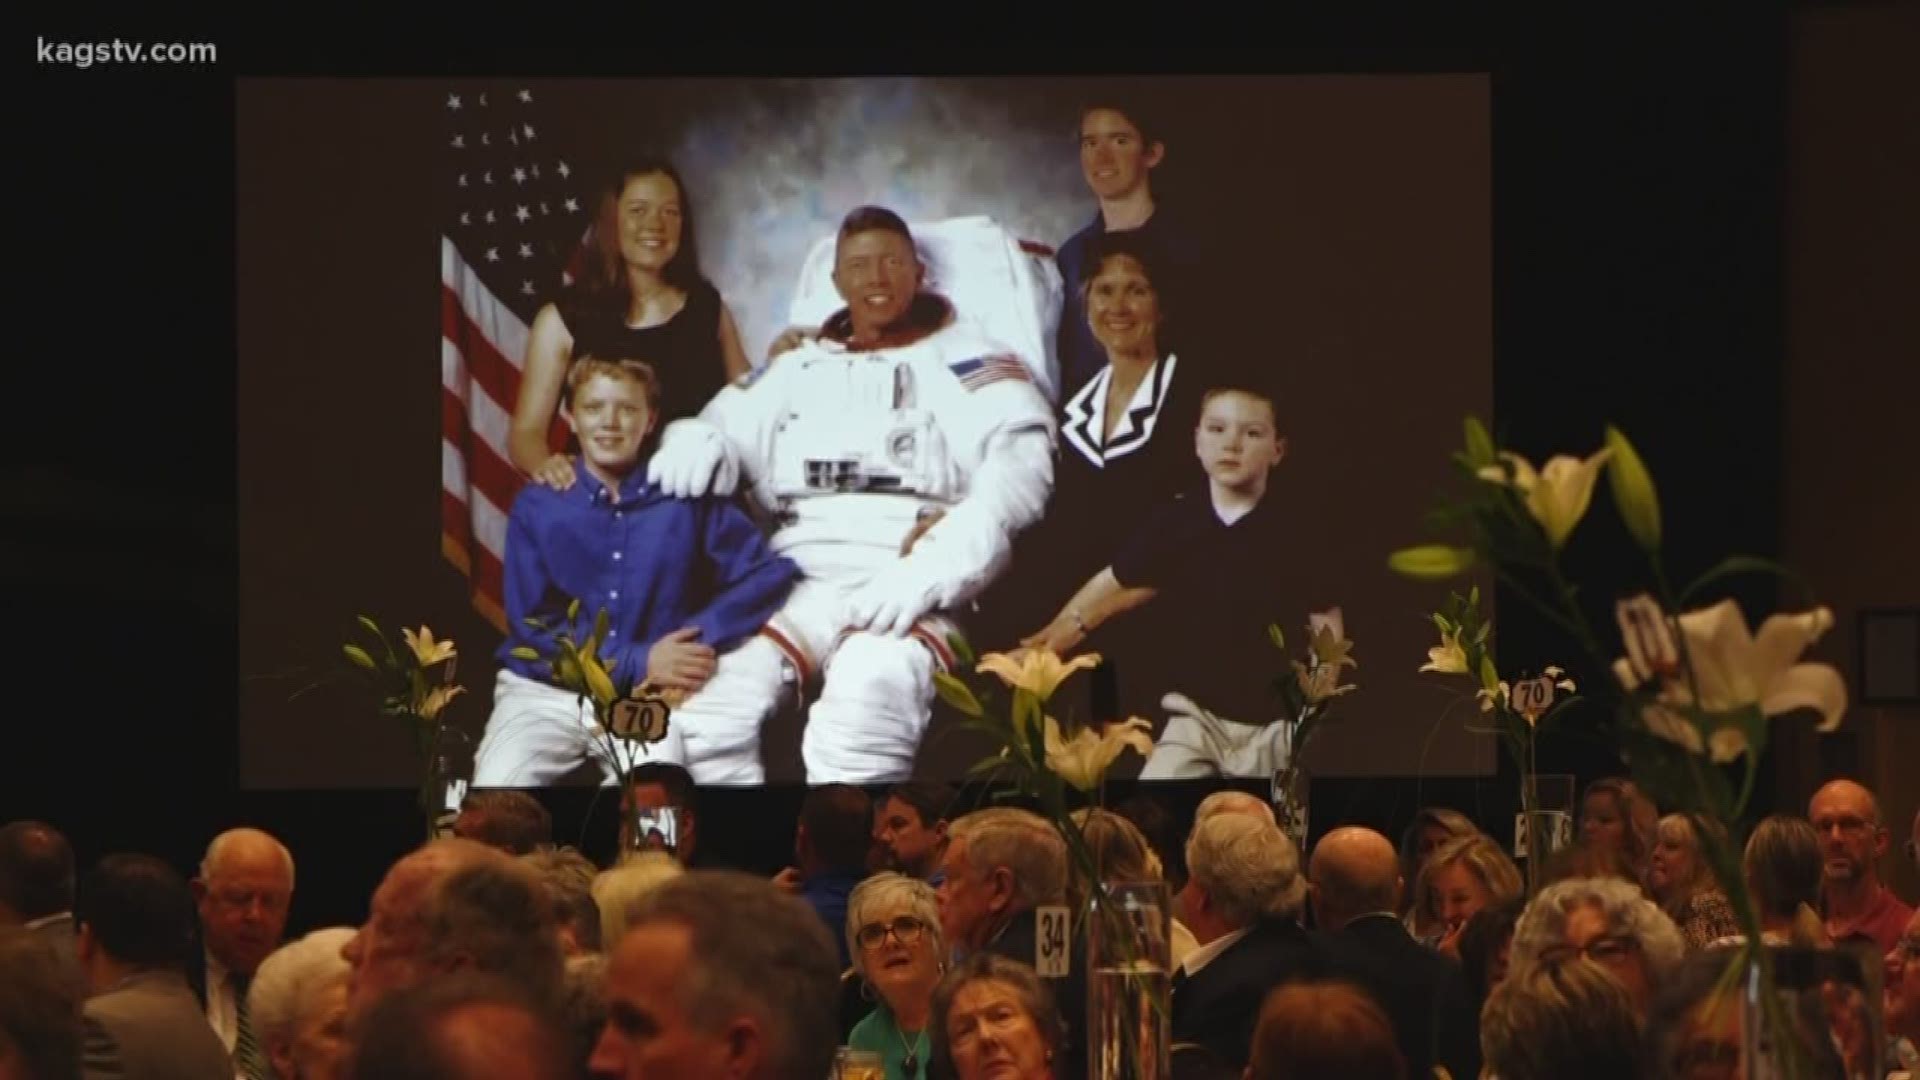 Col. Michael E. Fossum, also known as the "Aggie Astronaut," spoke at the Salvation Army's eighth annual "Doing the Most Good" luncheon.